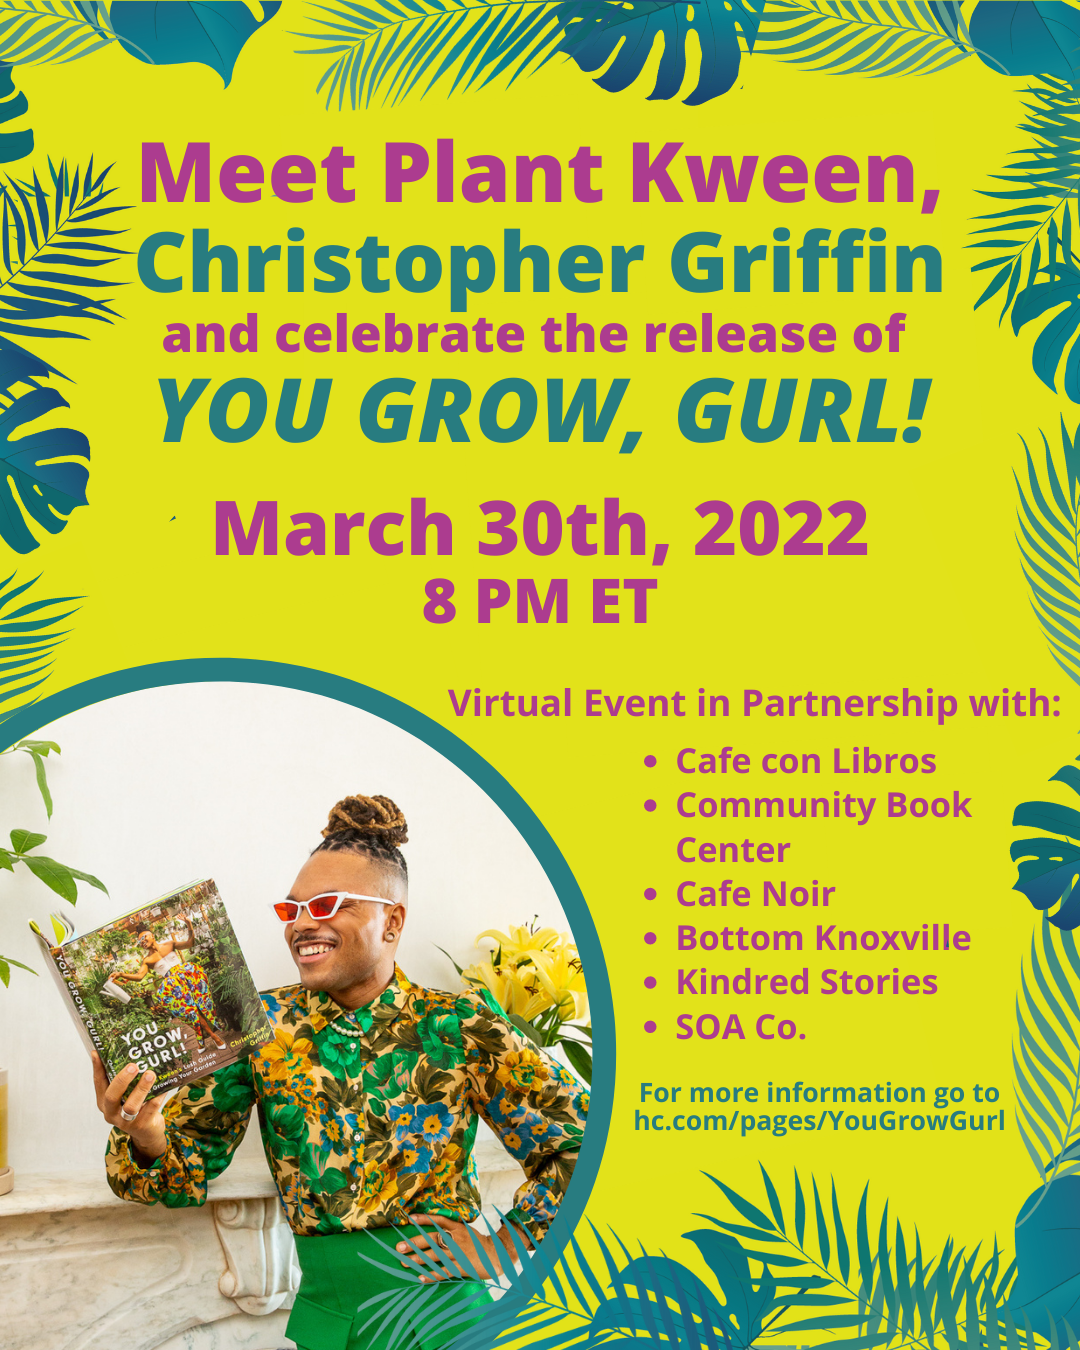 Virtual Author Talk: You Grow Gurl with Christopher Griffin - March 30 @ 7:00 PM CST